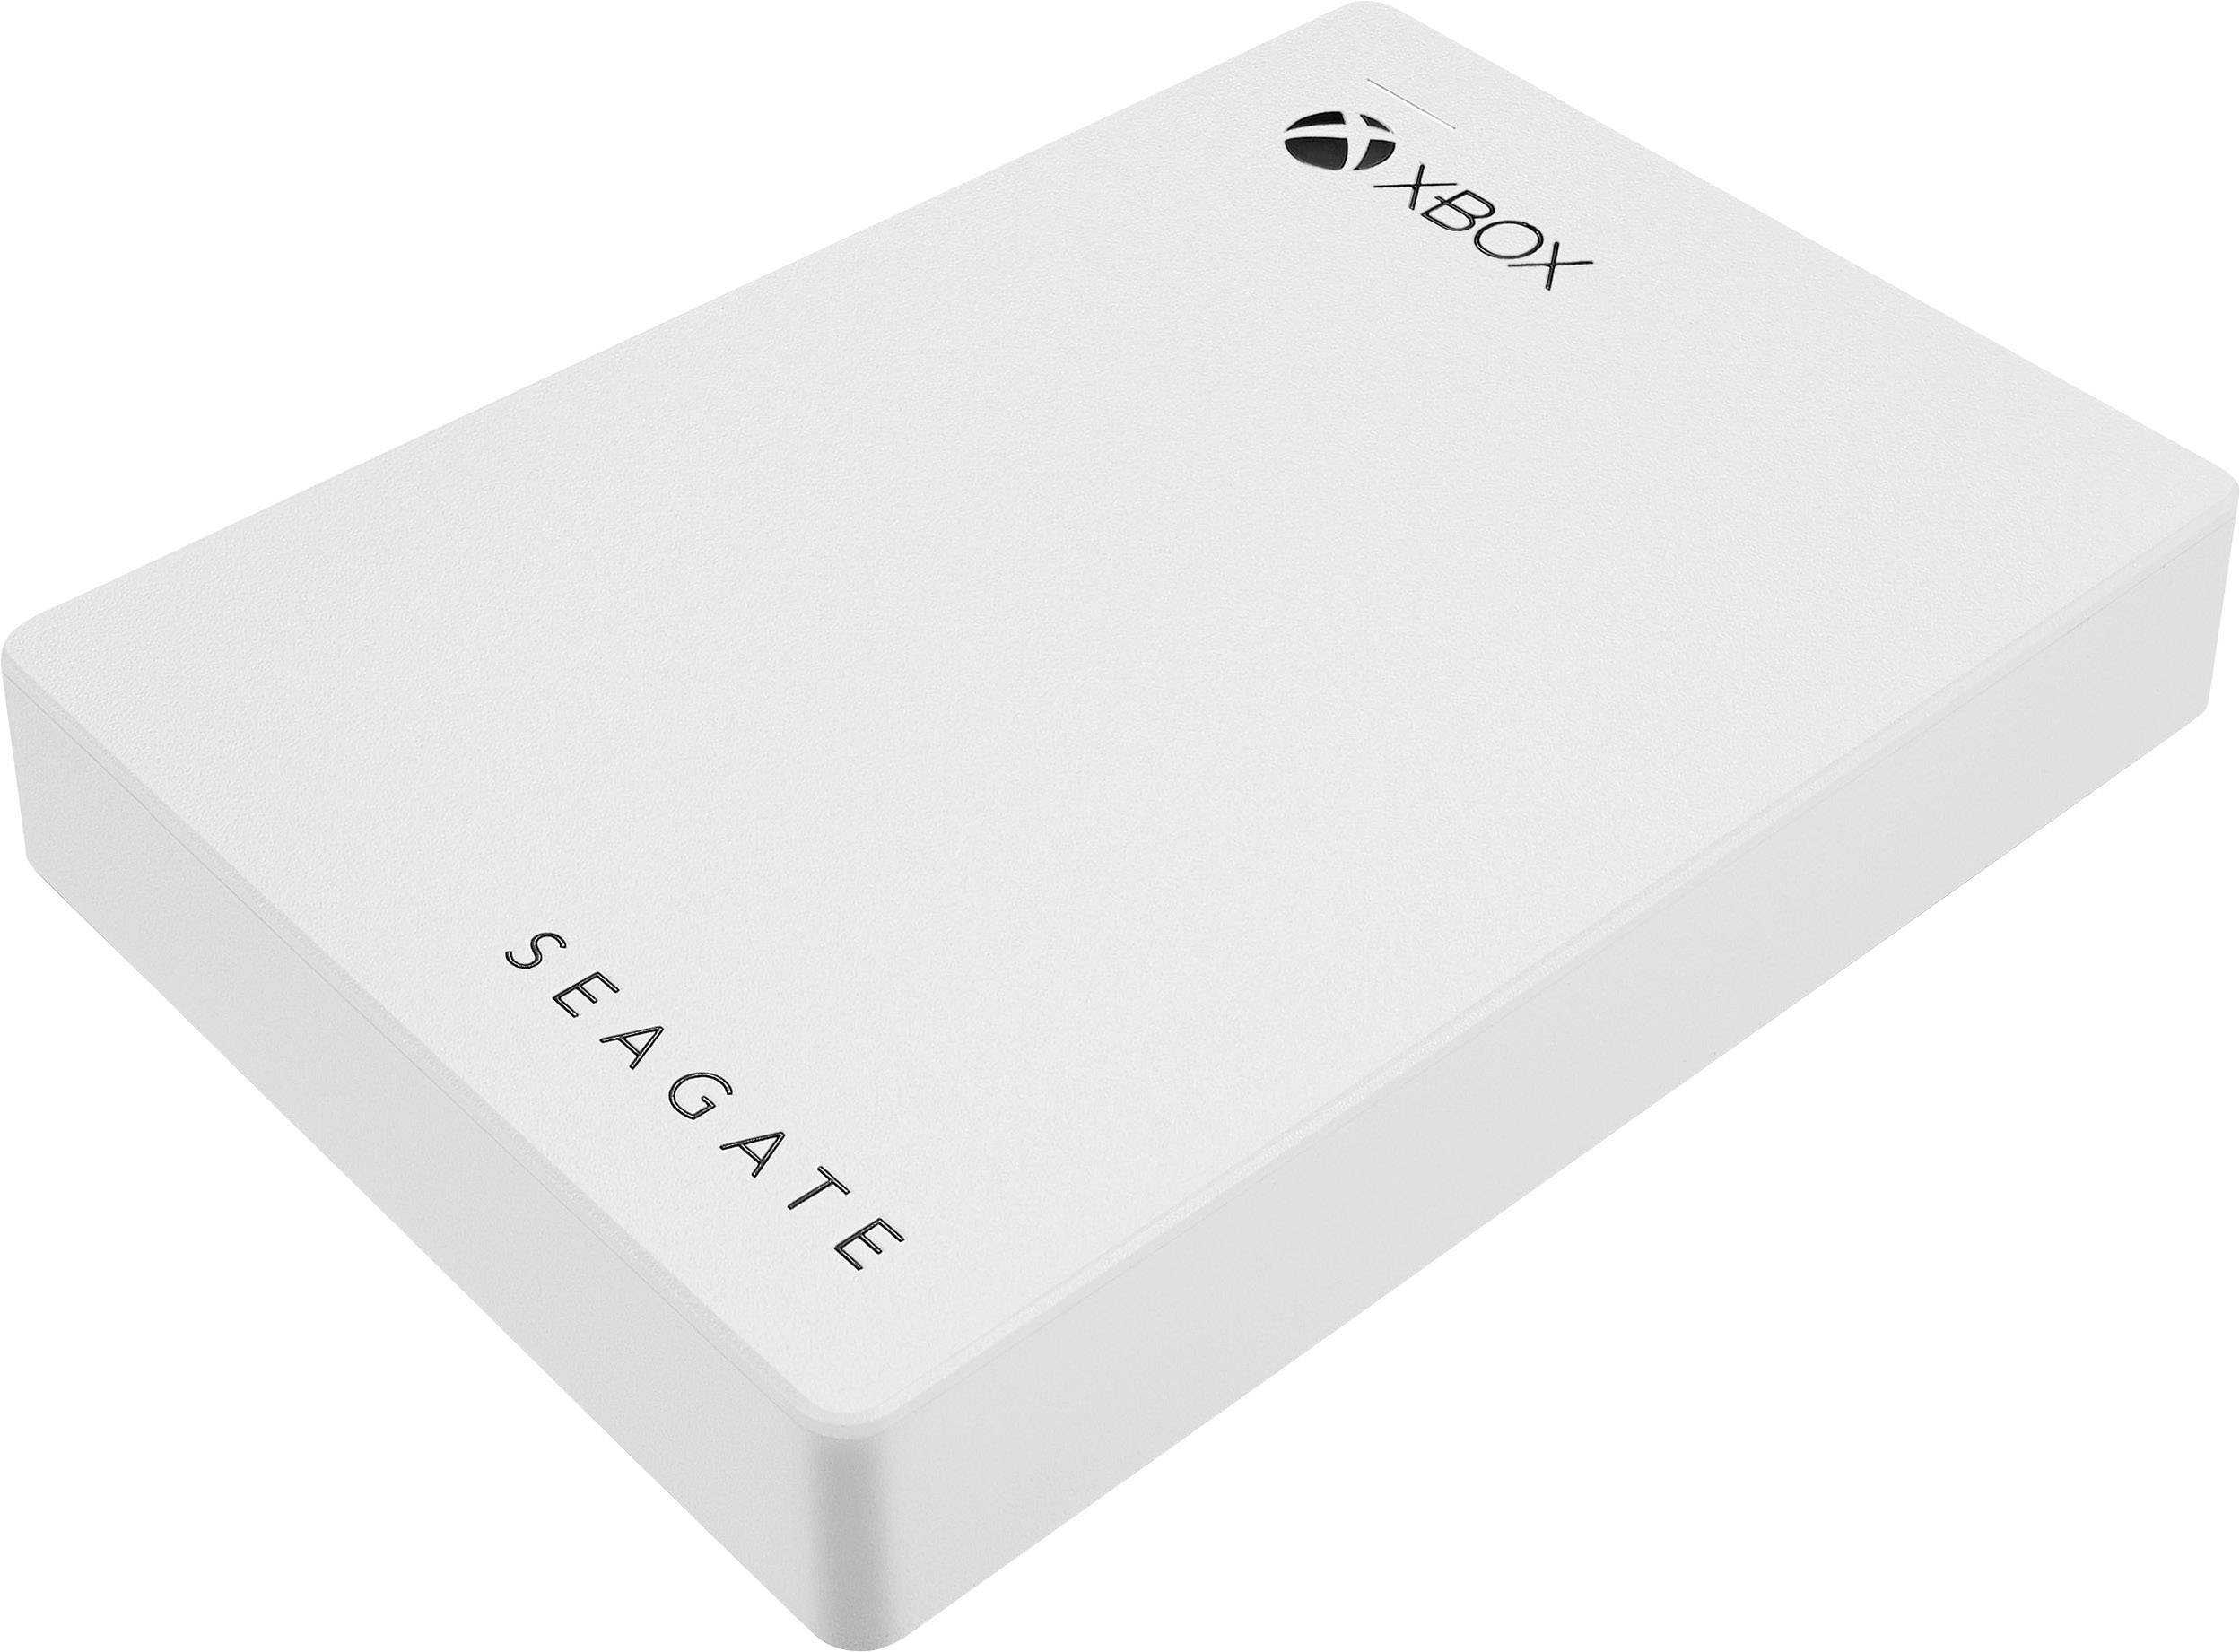 external hard drive for xbox